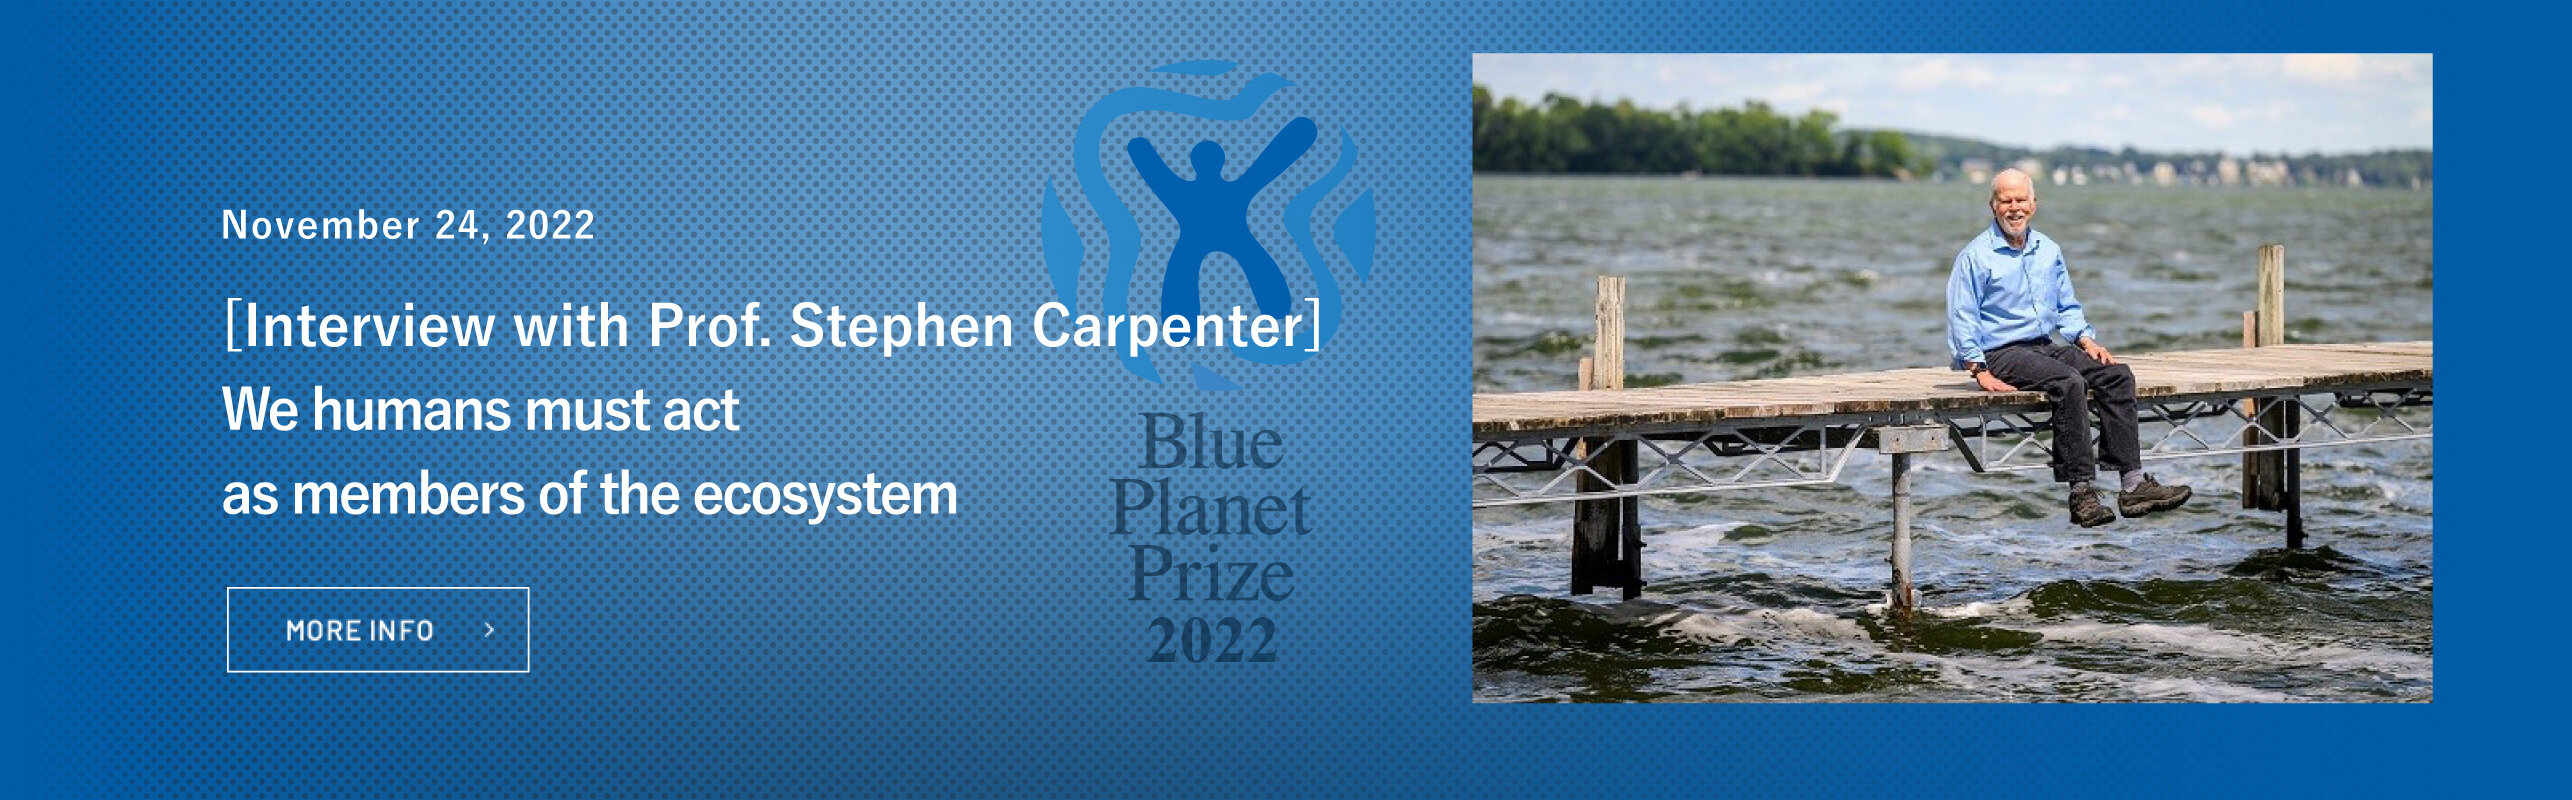 Phosphorus and nitrogen are already at the Earth's limits. We humans must act as members of the ecosystem <br>-- Interview with 2022 Prize Winner Professor Stephen Carpenter: The Future of Phosphorus and Nitrogen Cycles --